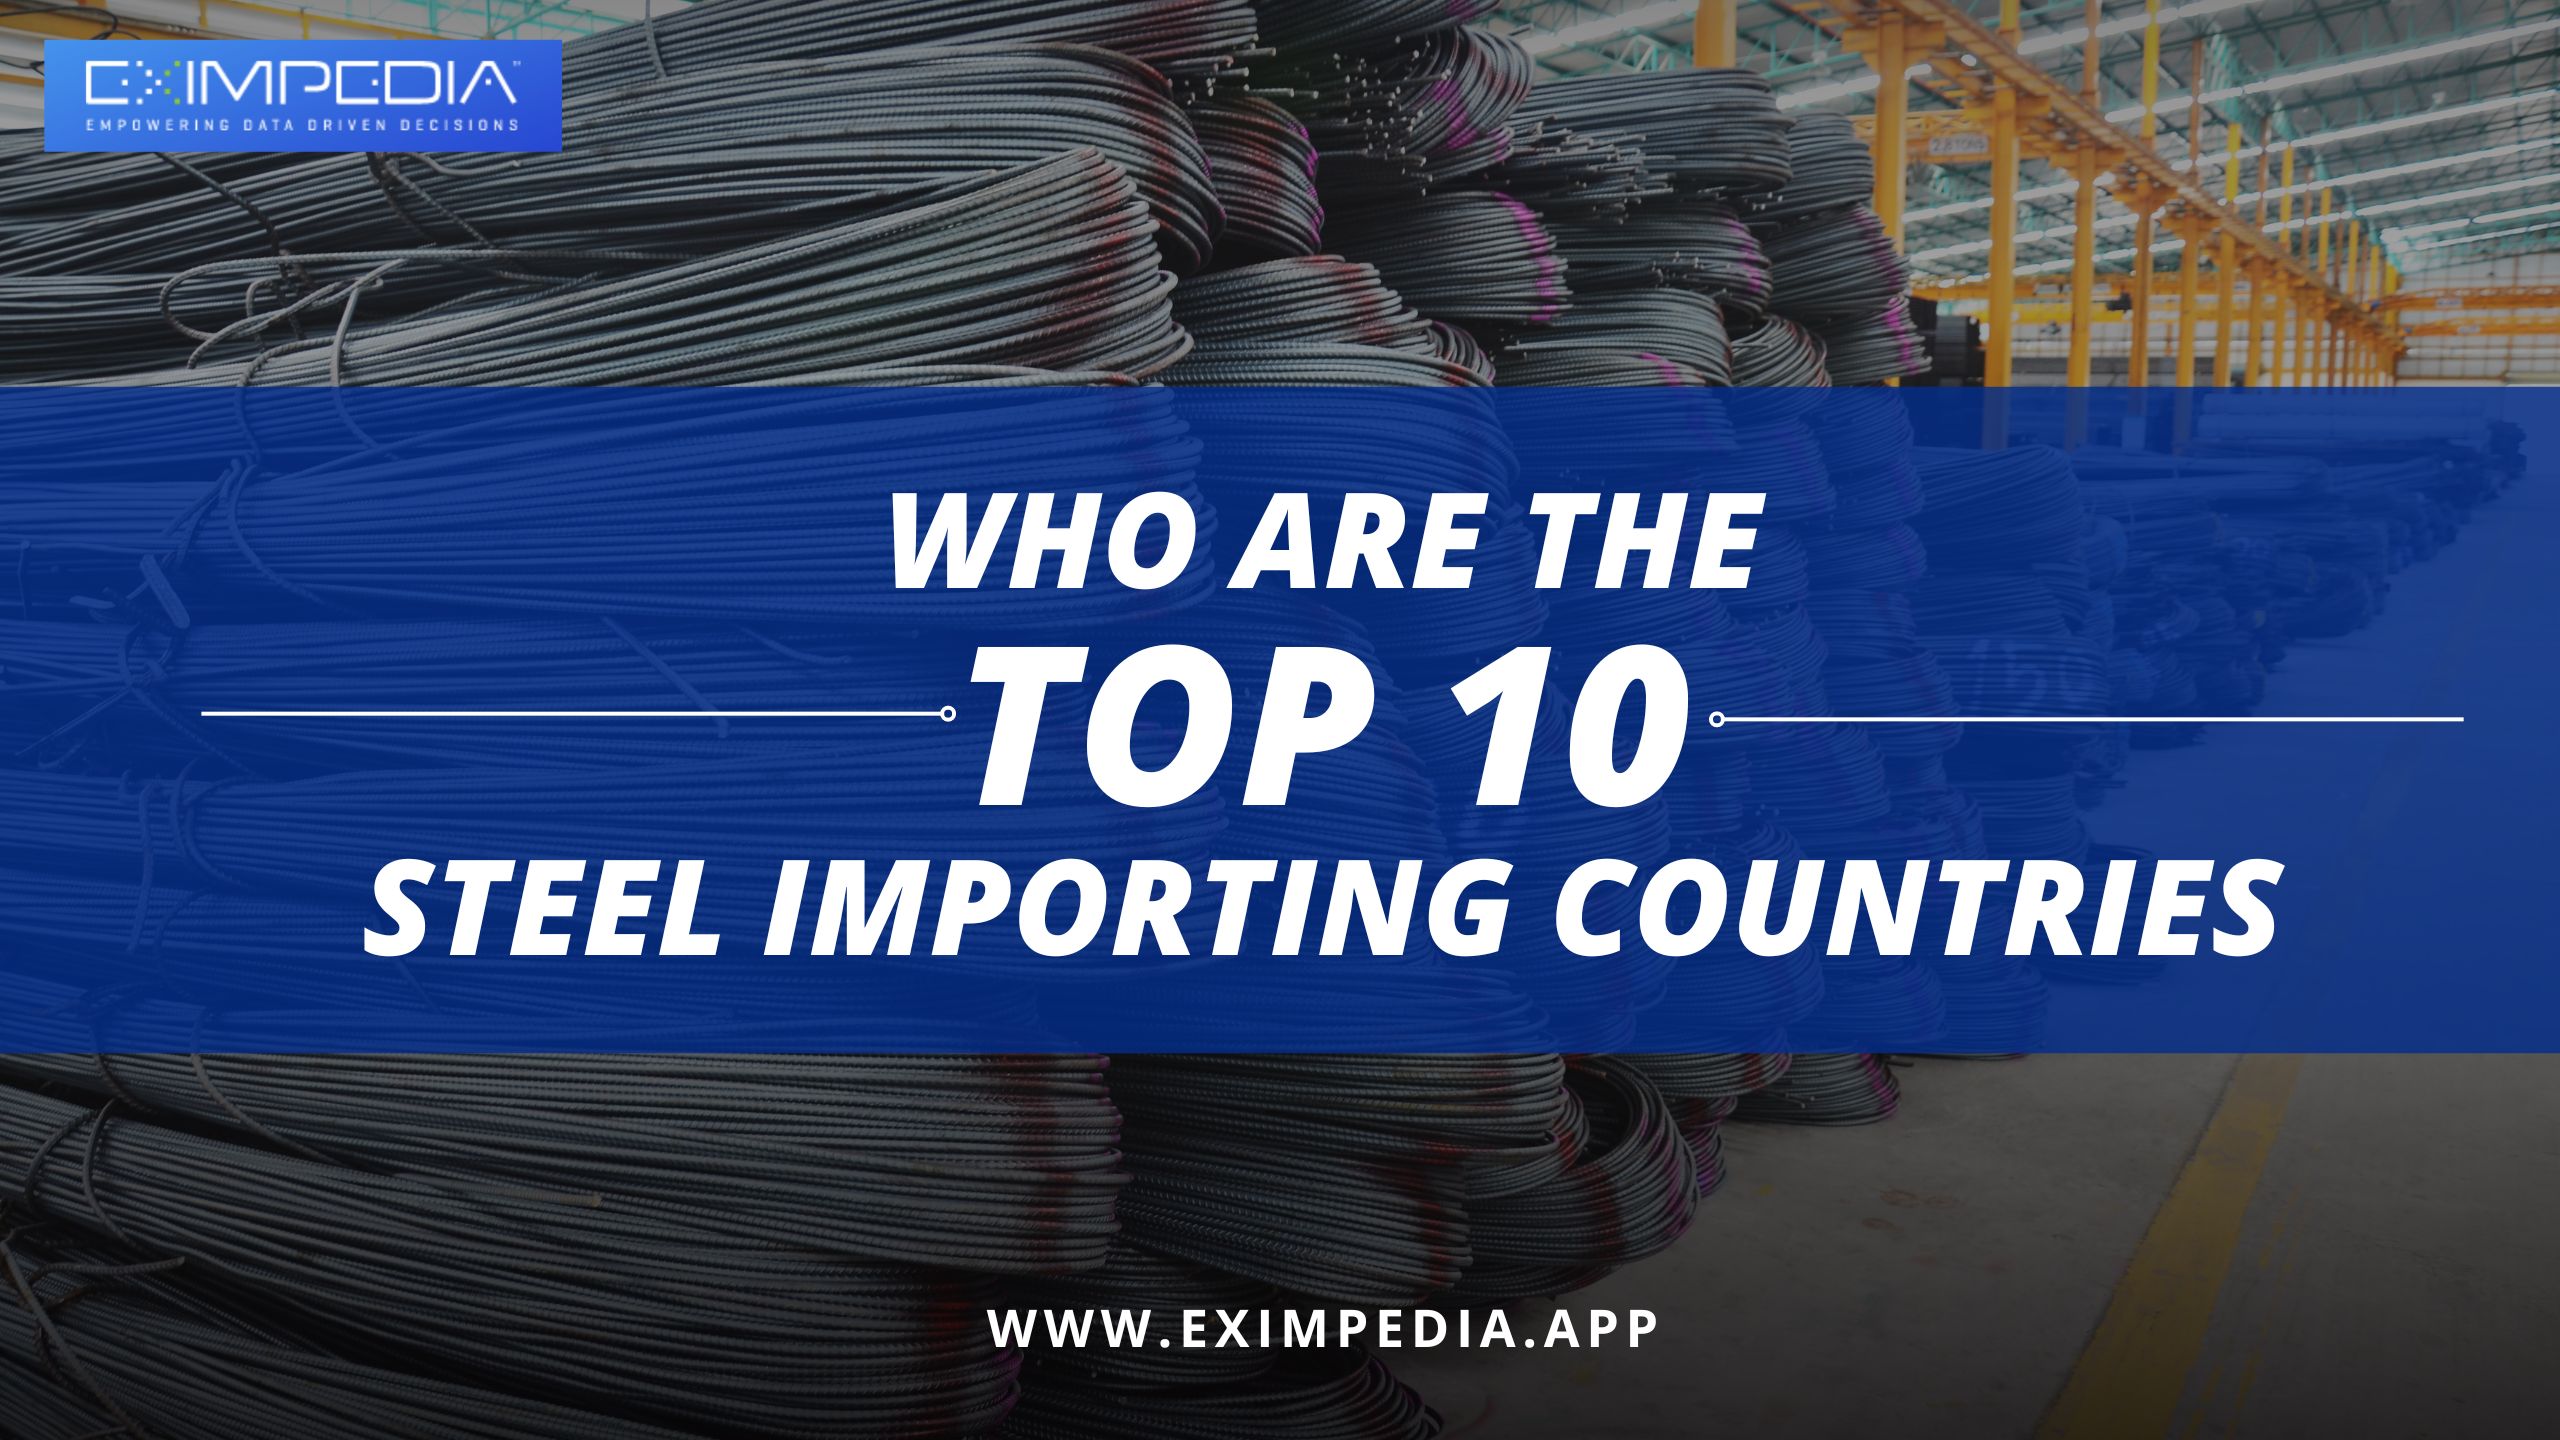 Top 10 Steel Importing Countries - Latest Buyers Data